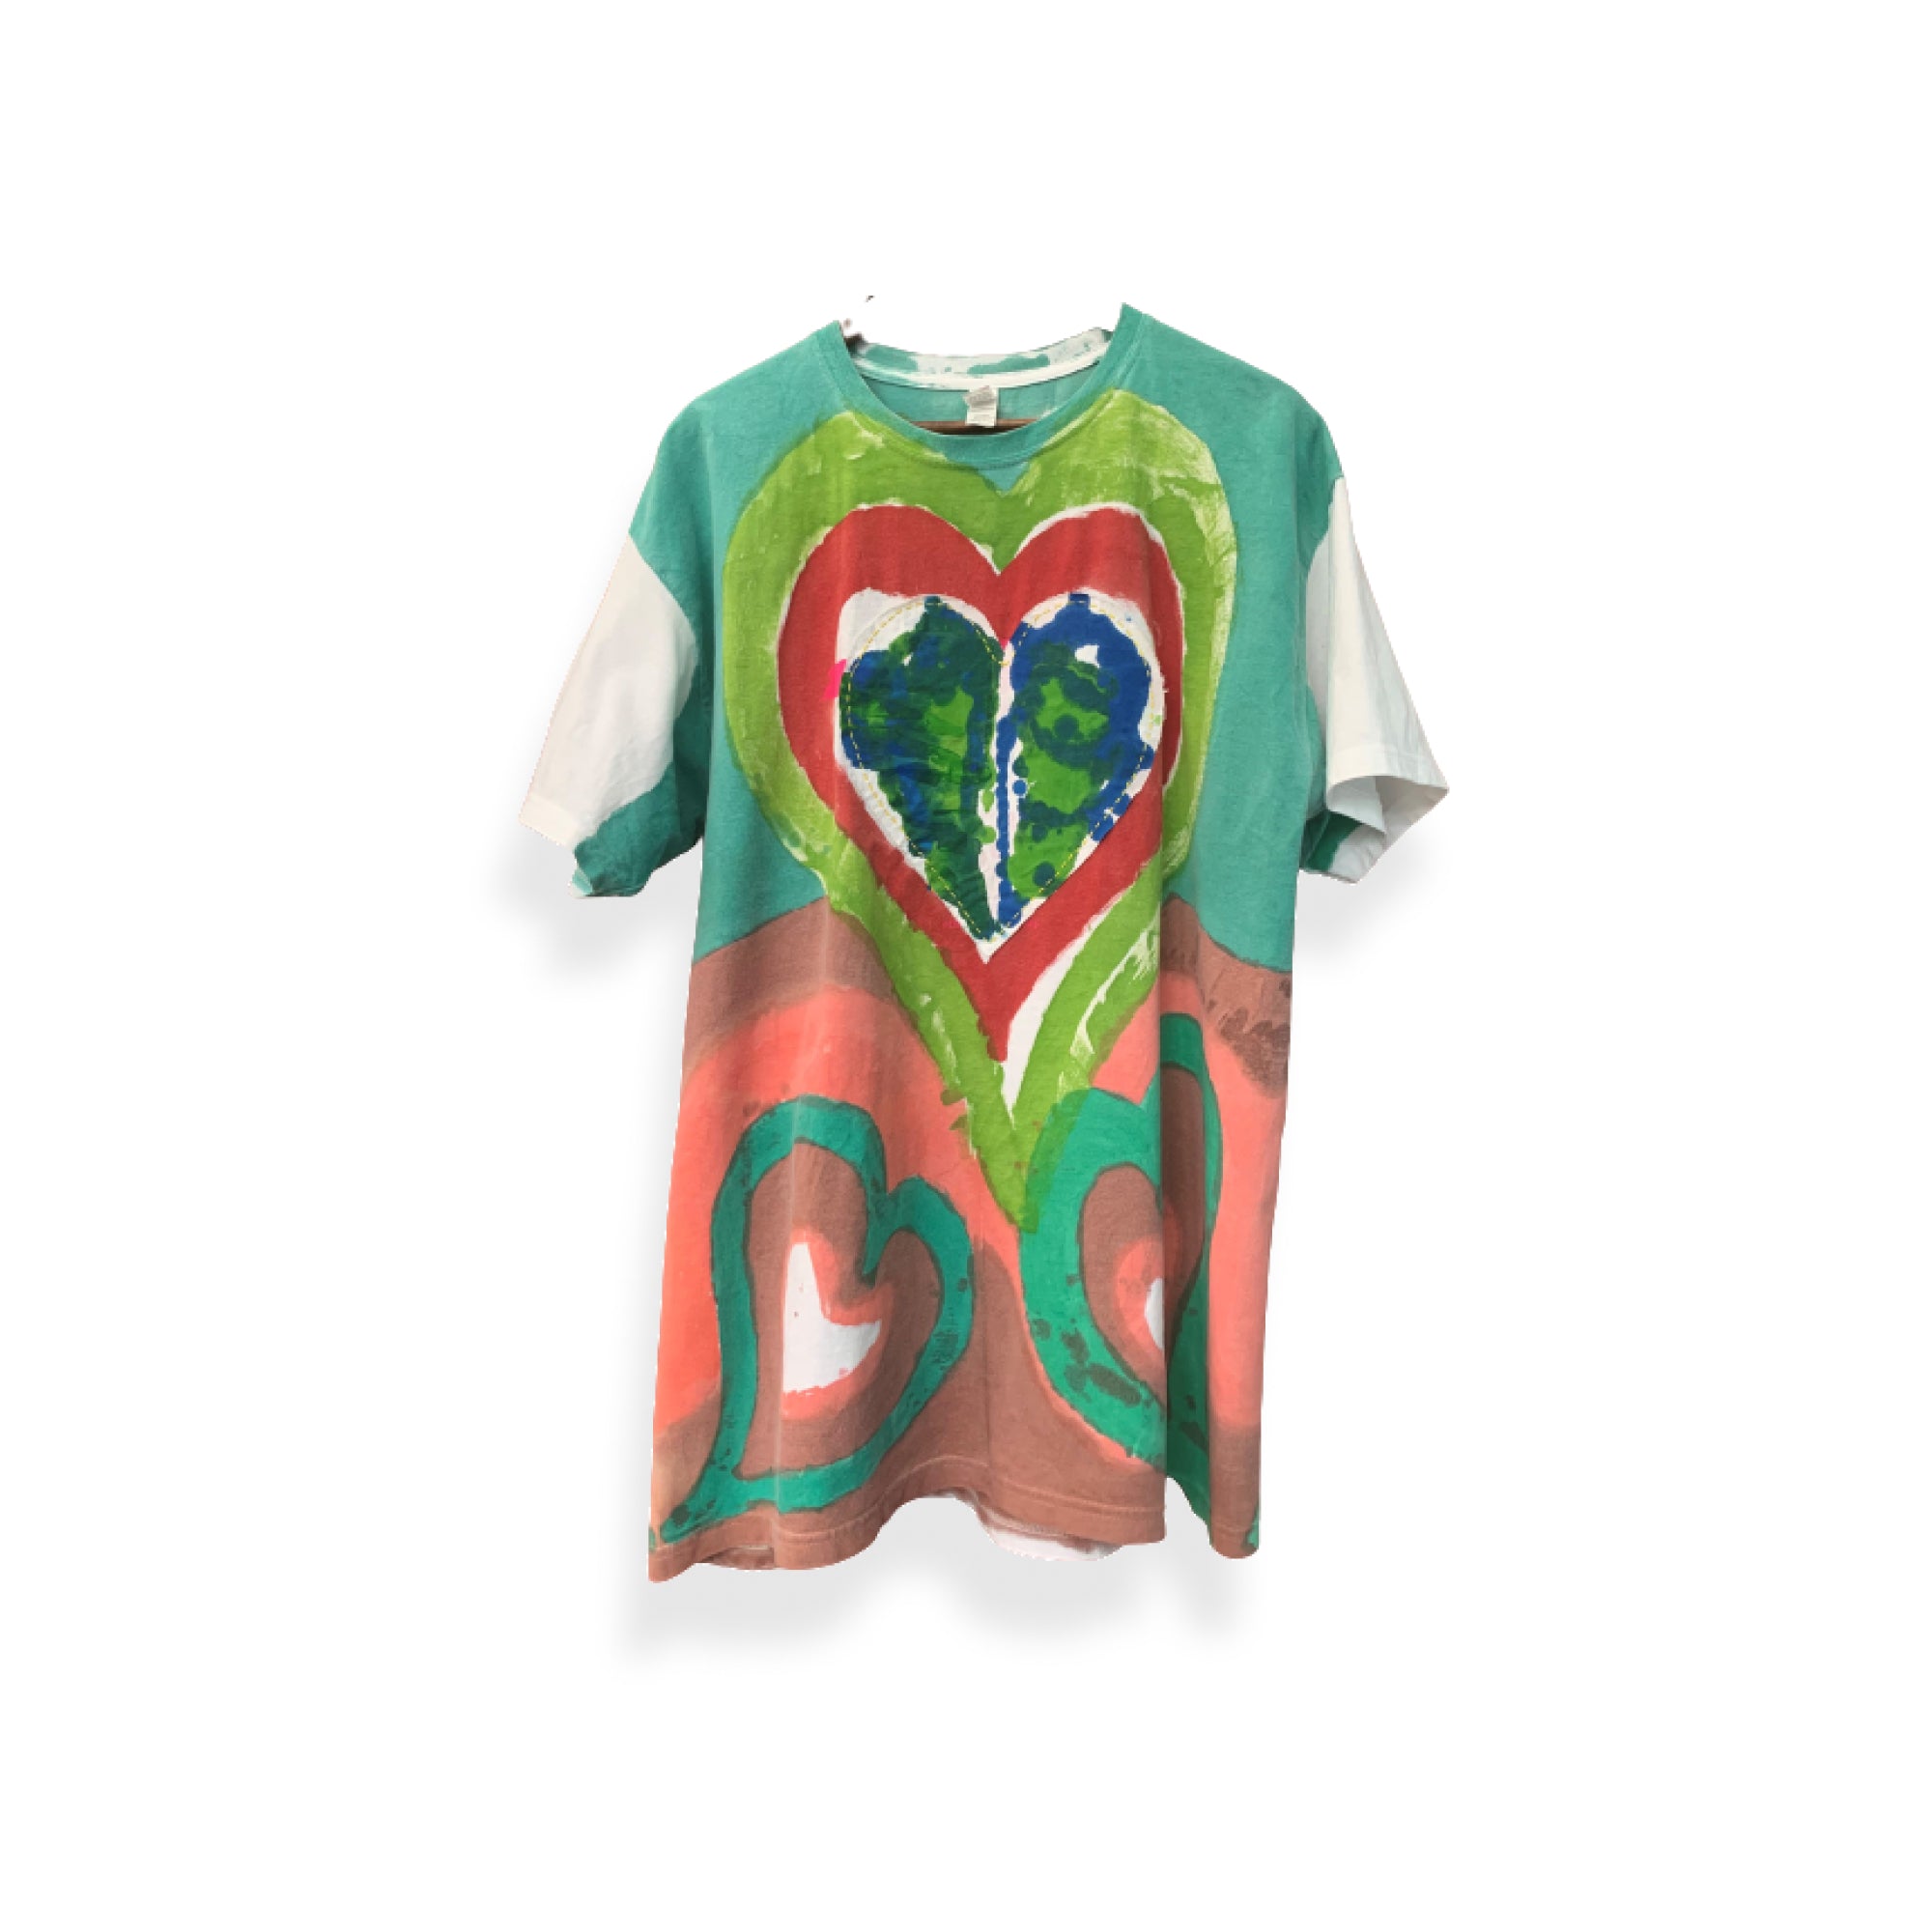 Hand Painted with Appliqued Heart T-shirt